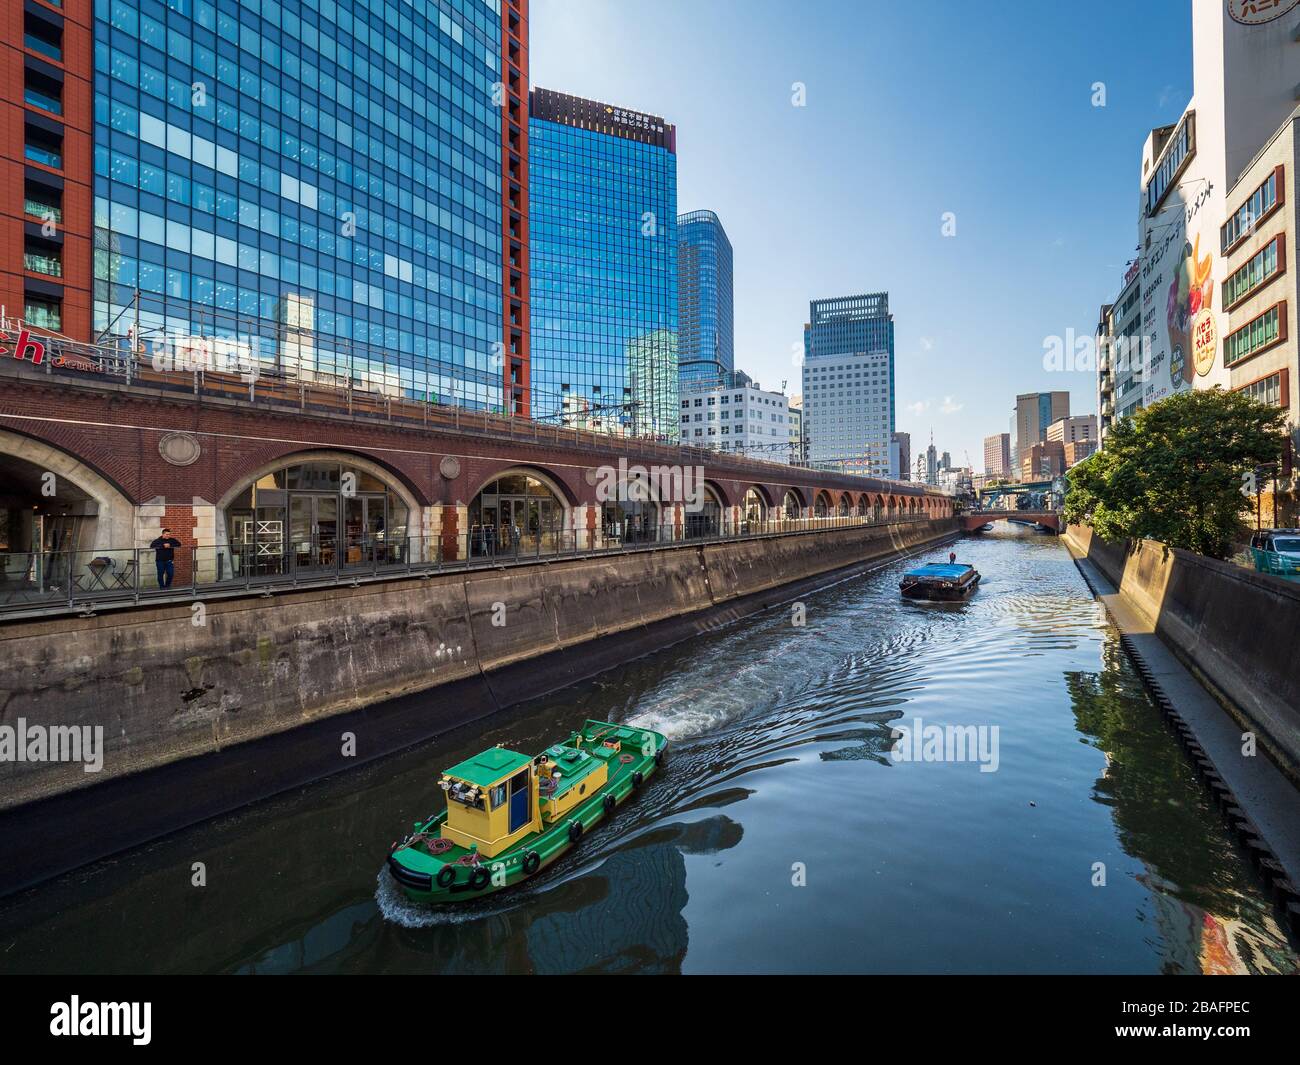 River traffic on the Tokyo Kanda River as it passes through the Akihabara district. A tug and towed barge on the Kanda River in Tokyo Japan. Stock Photo